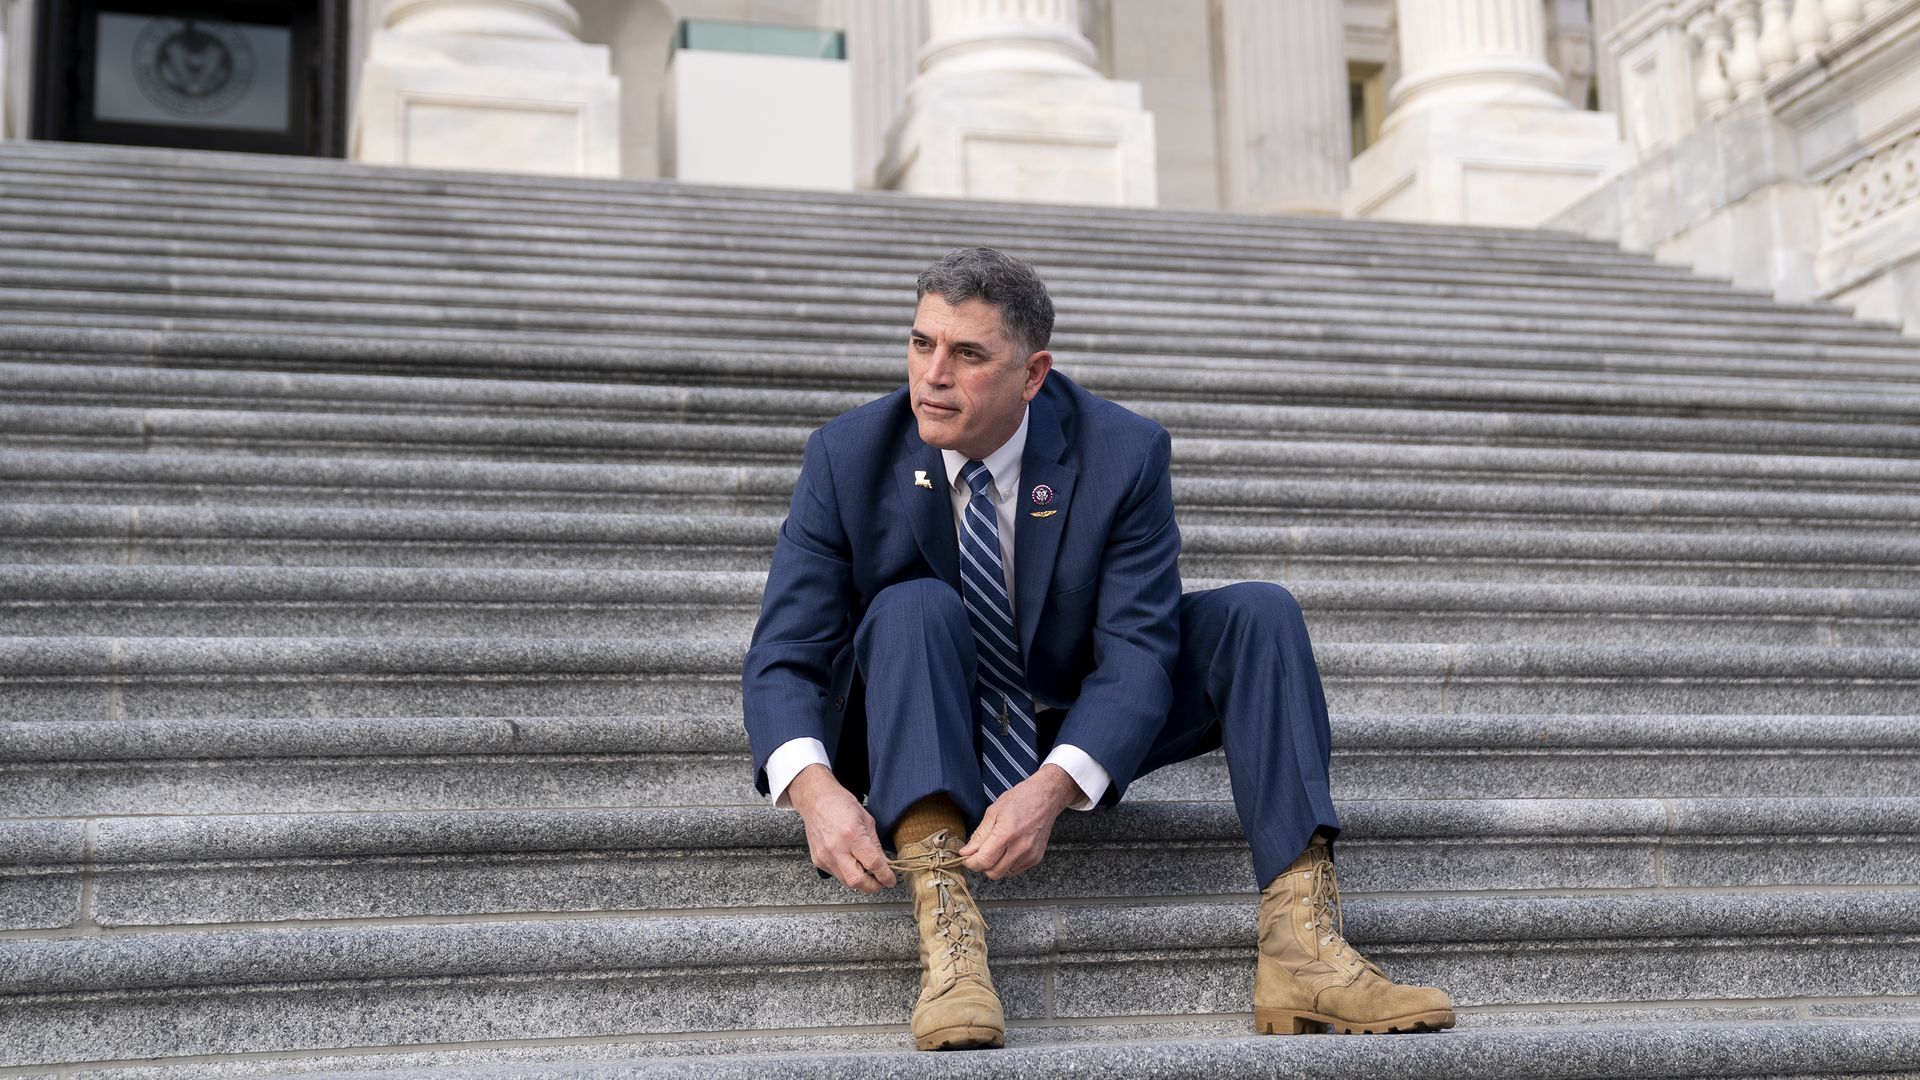 Andrew Clyde laces combat boots on steps of U.S. Capitol